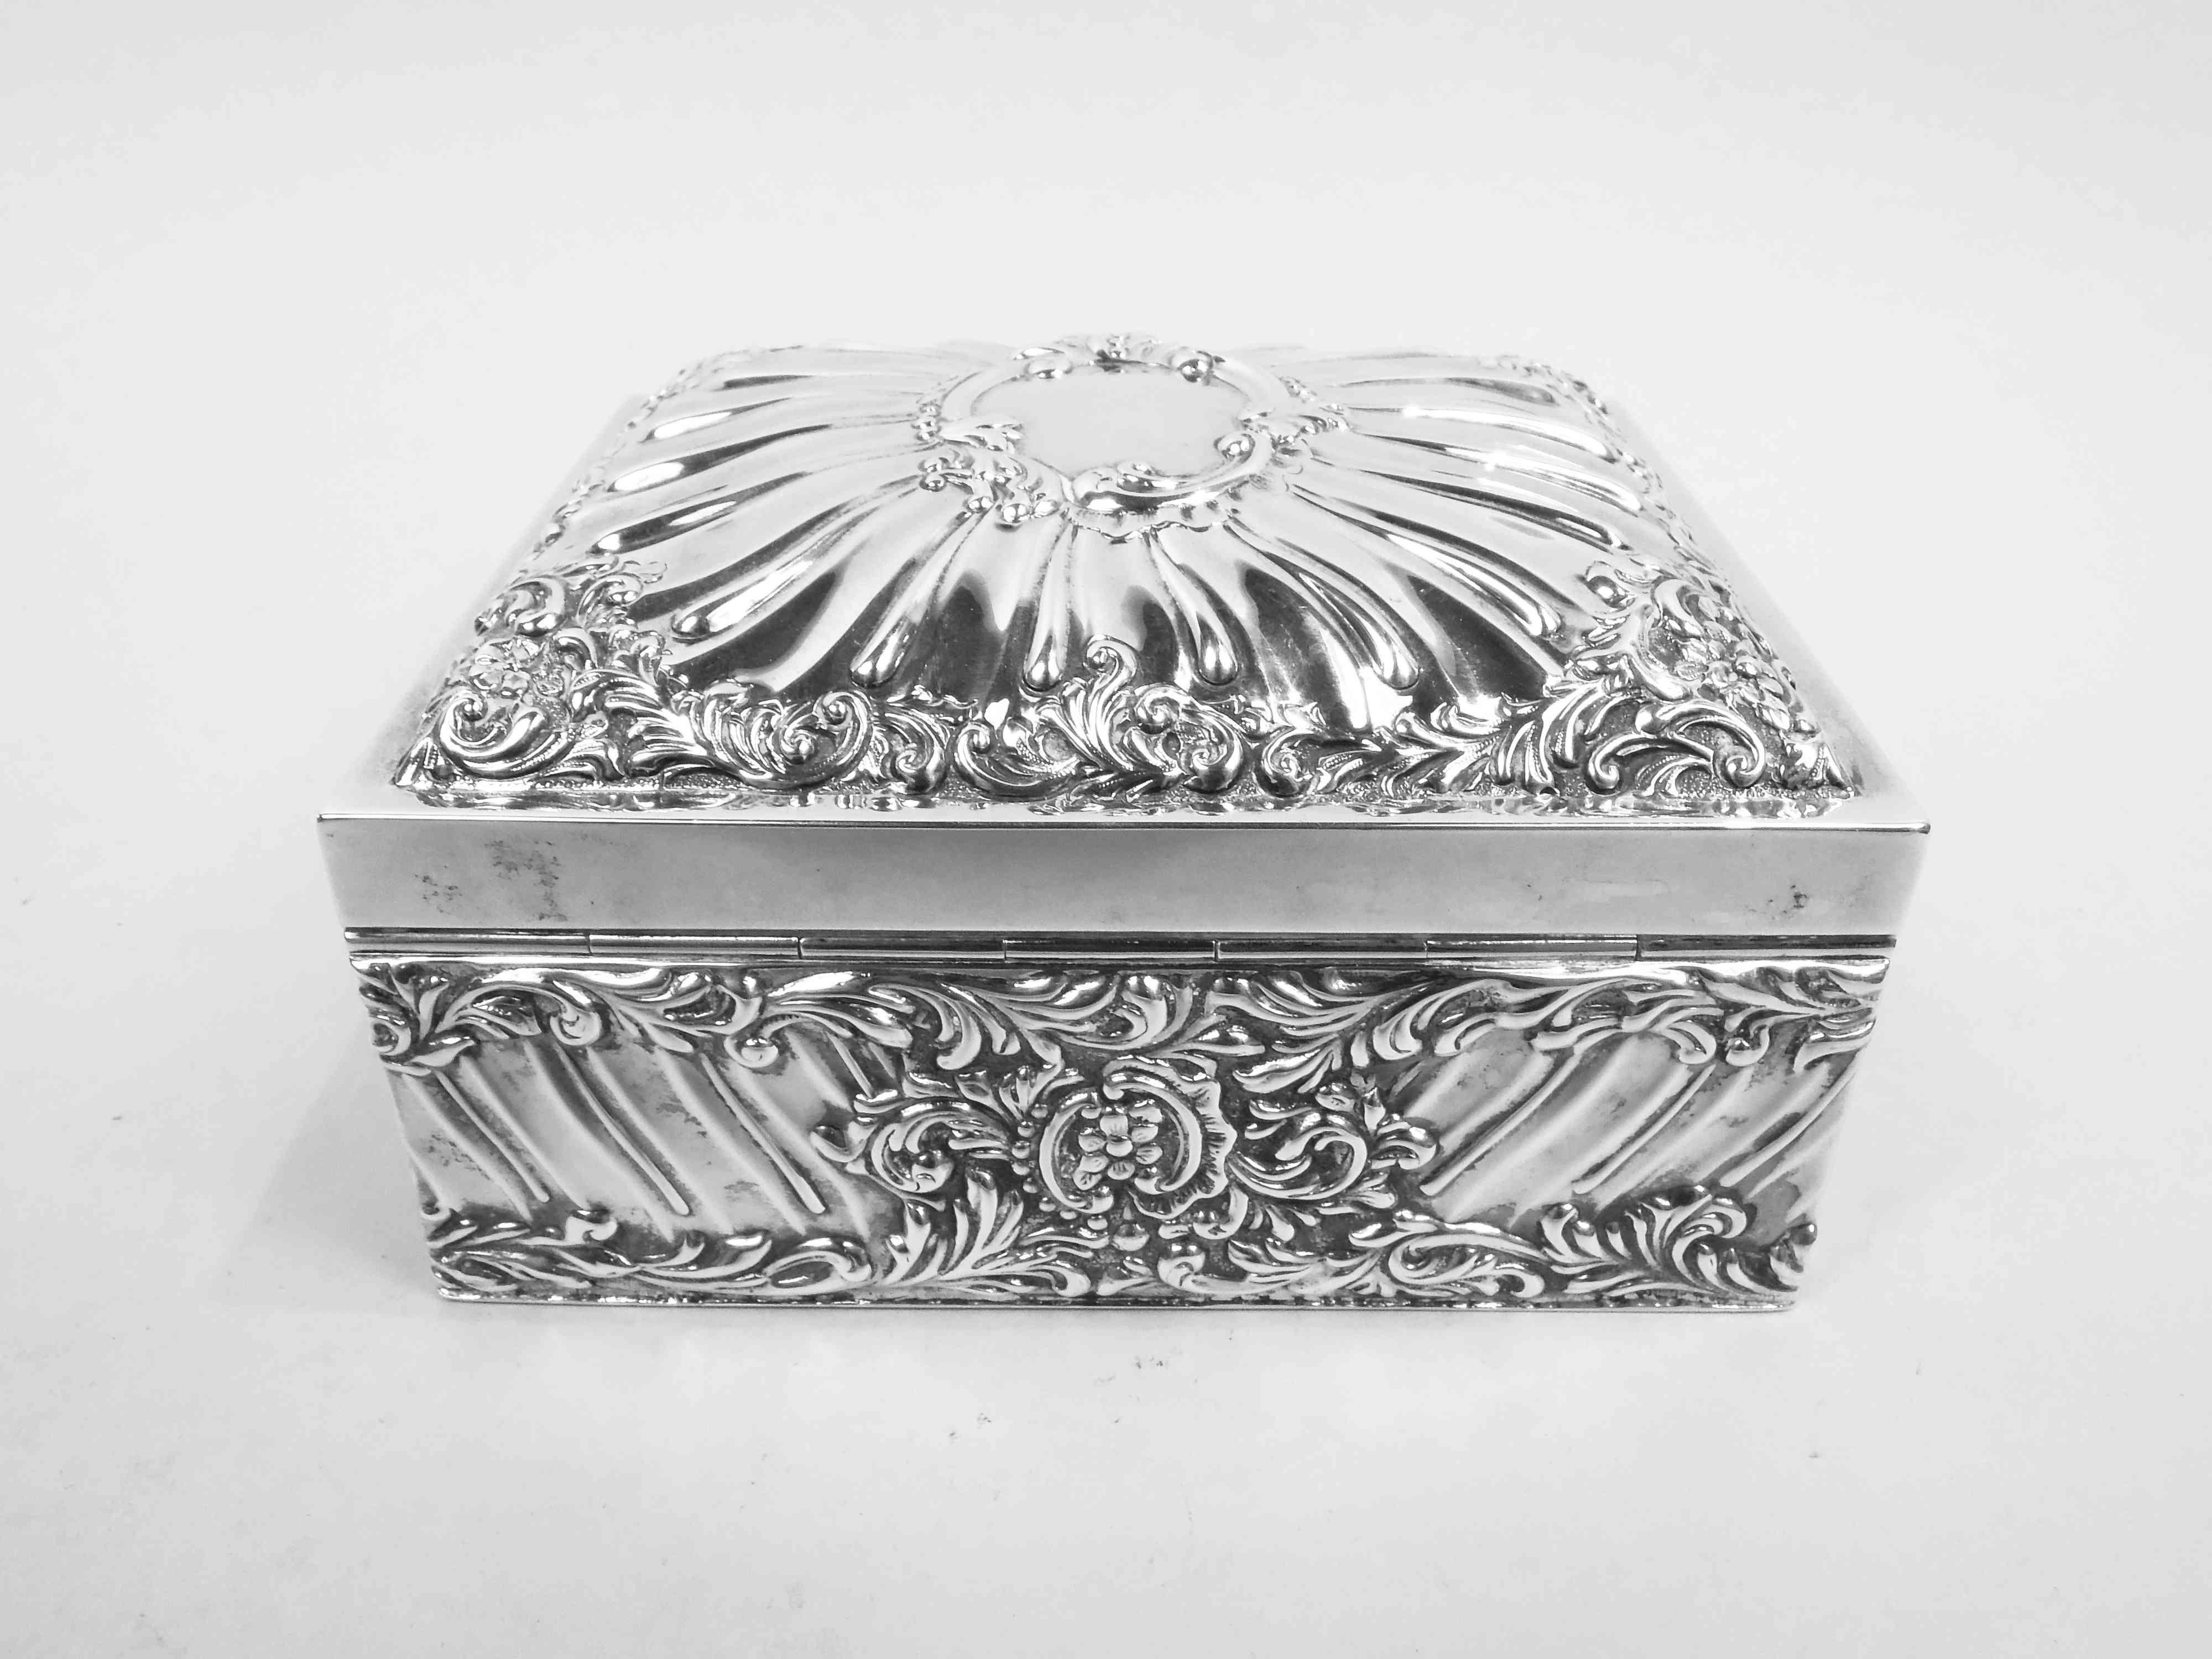 Early 20th Century Antique English Edwardian Classical Sterling Silver Jewelry Box, 1904